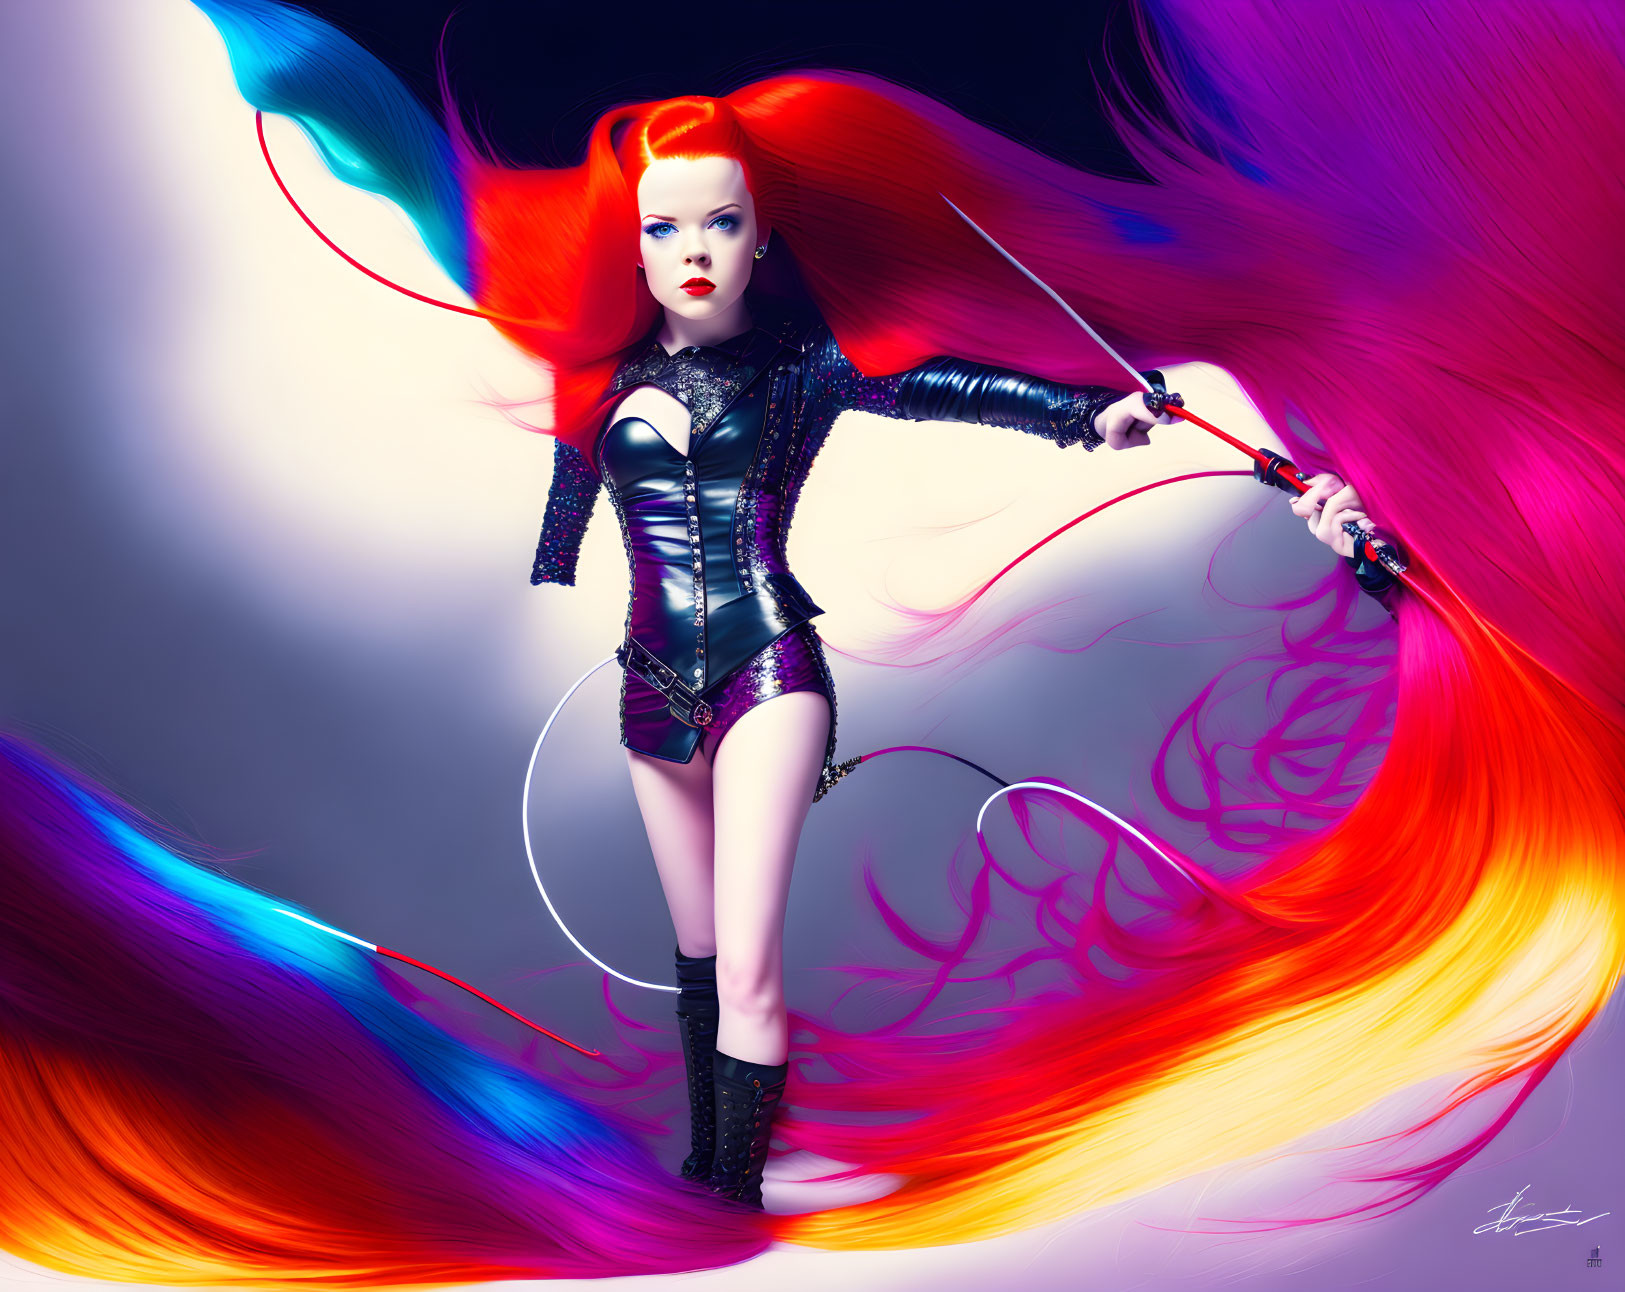 Digitally illustrated female figure with red hair holding a sword amidst colorful abstract shapes on purple background